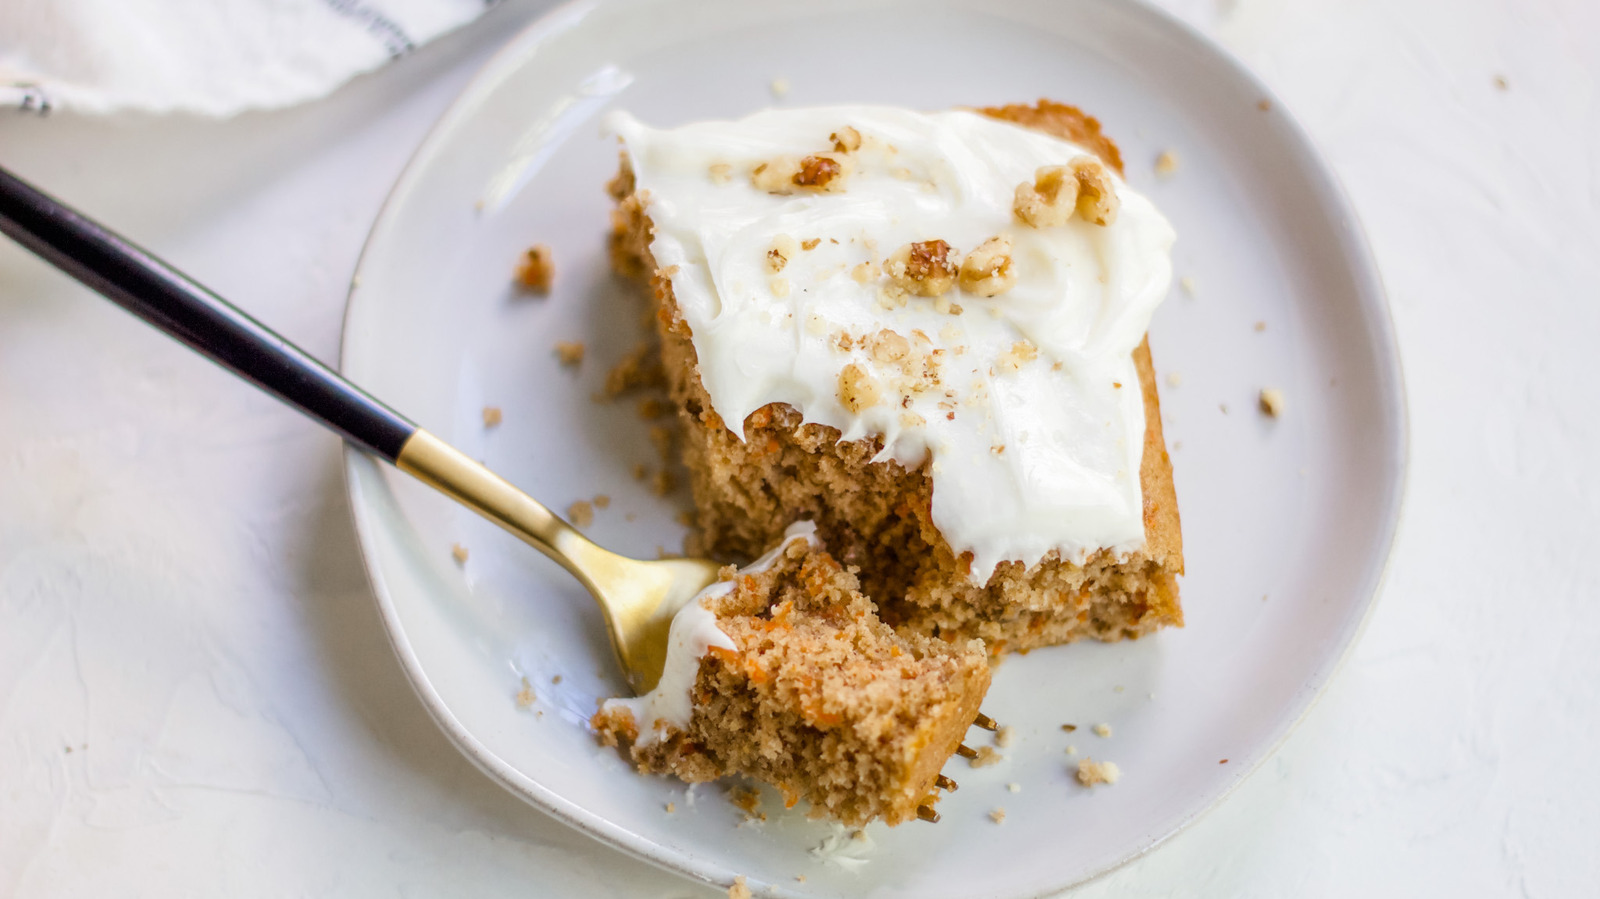 How to Make a Healthy Carrot Cake | Gousto Blog